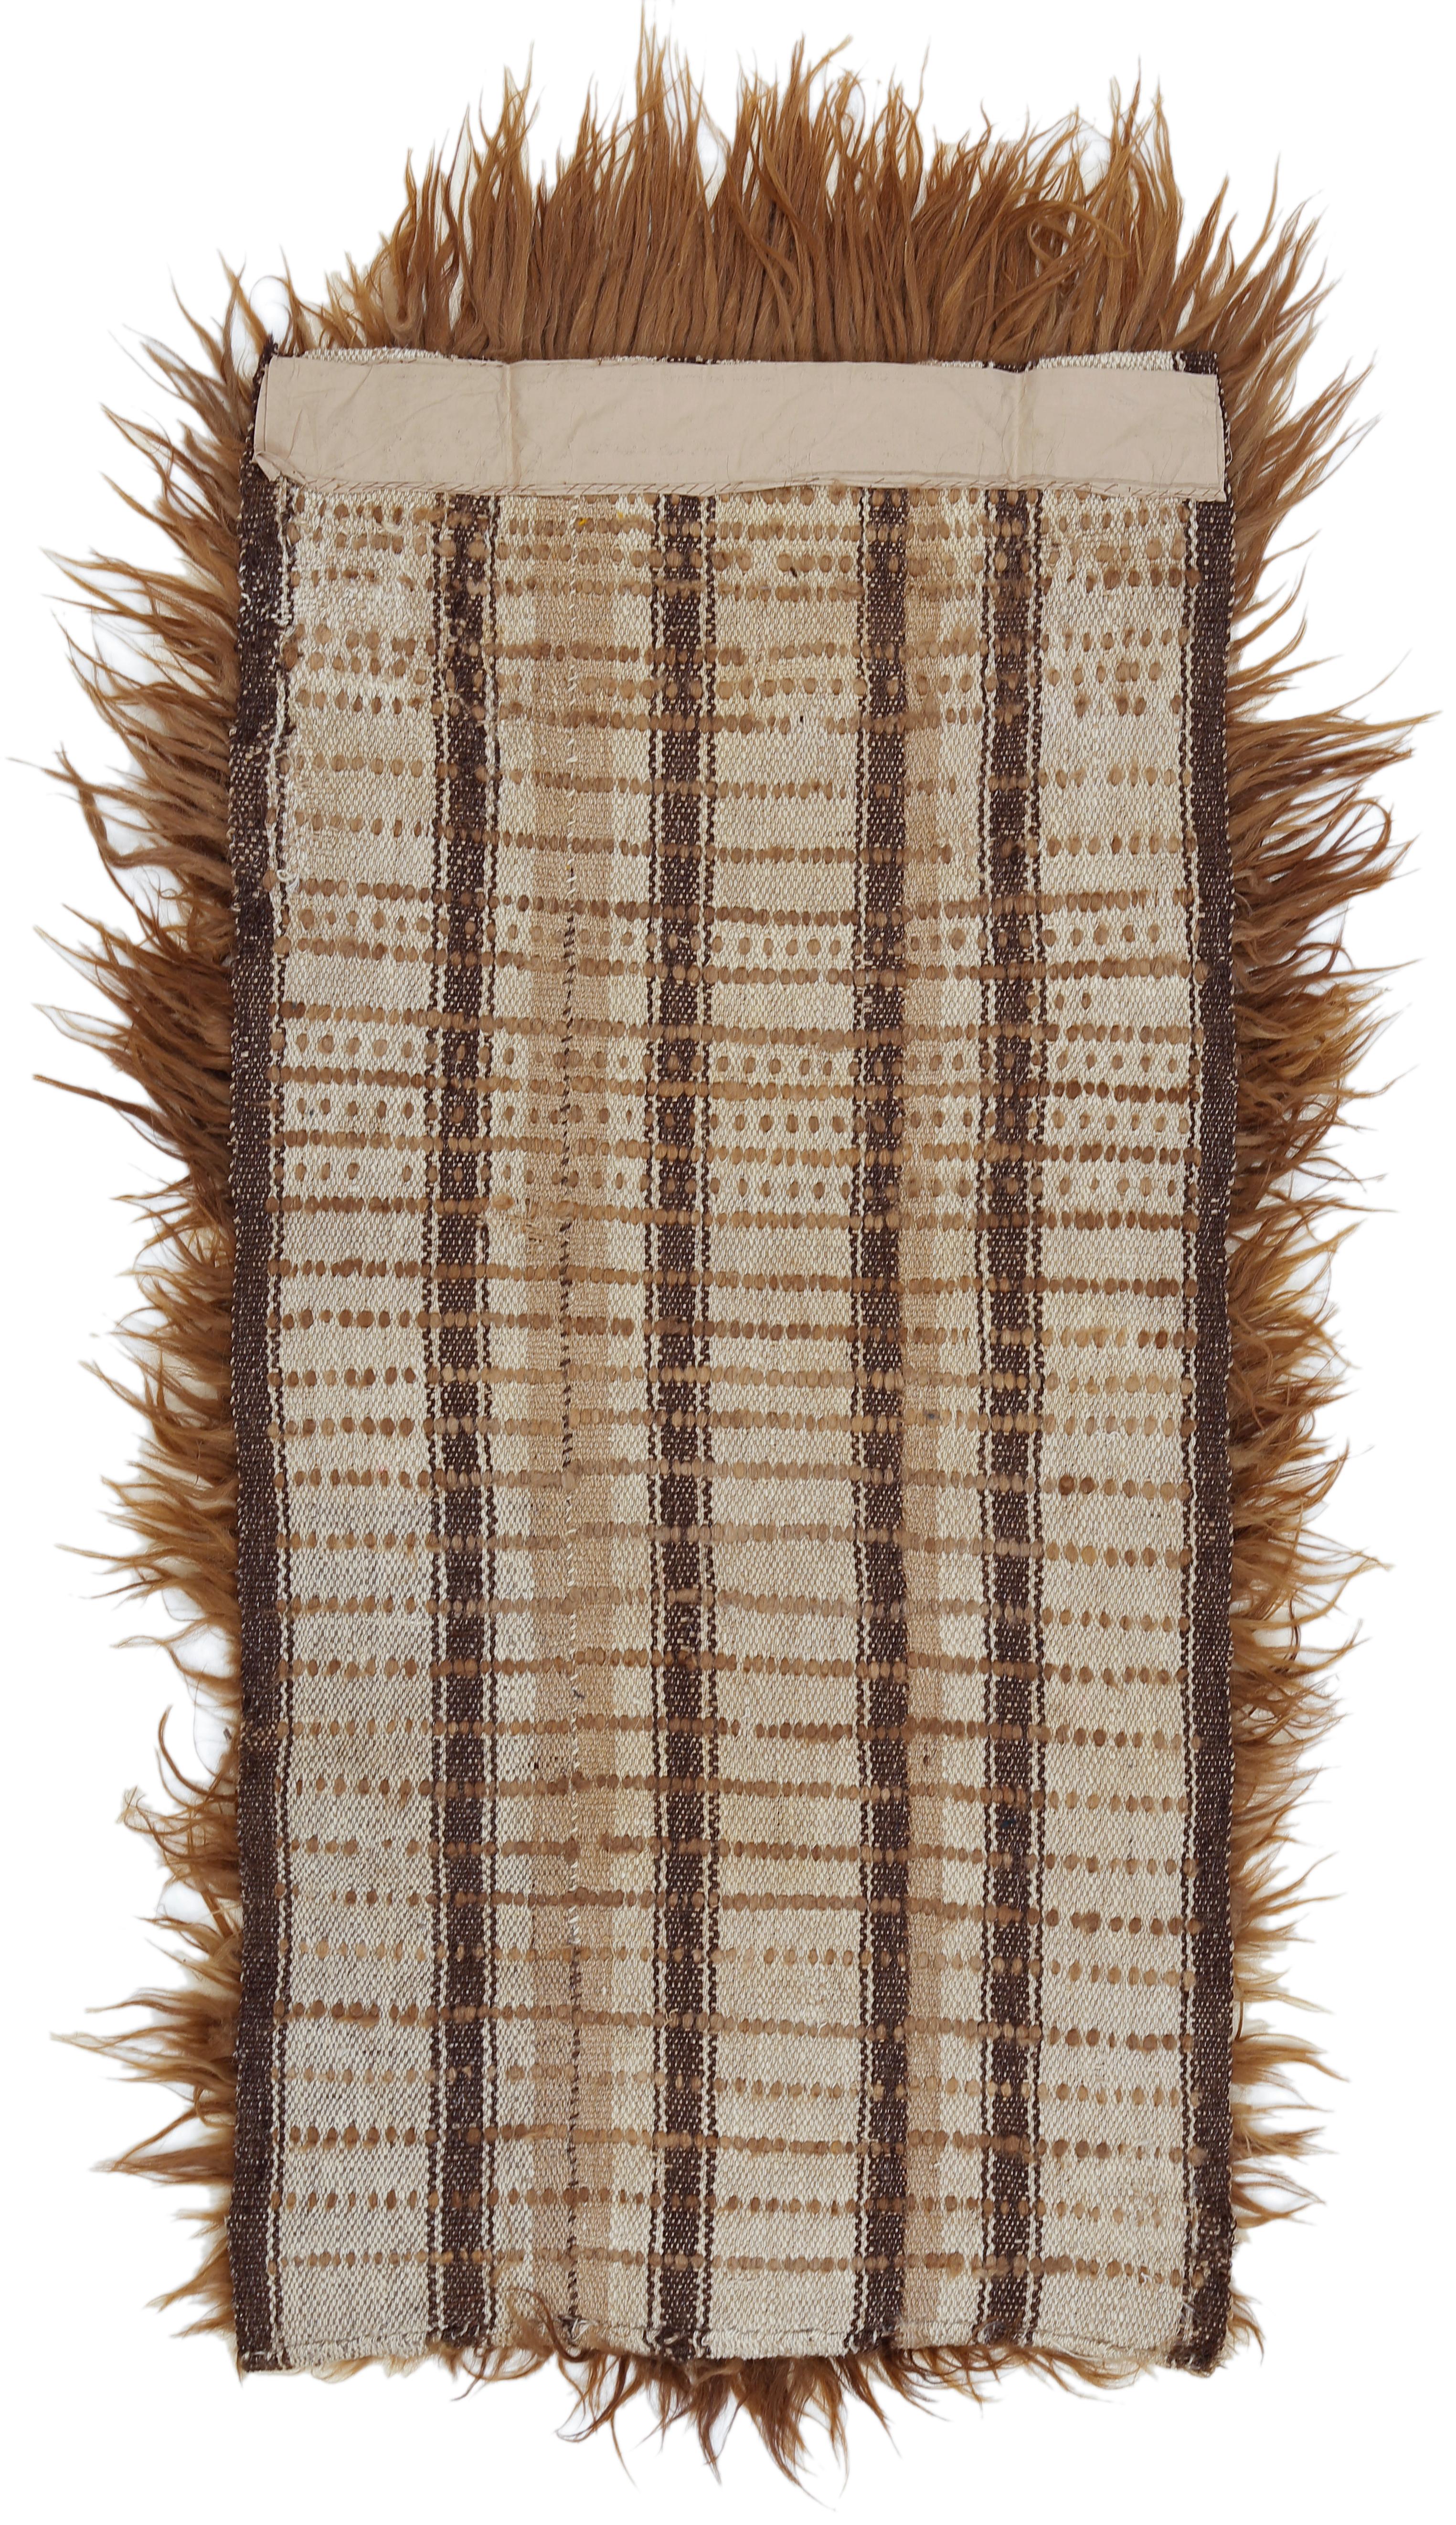 A very rare rug originating from the Taklamakan desert, located in northwest China, sparsely knotted with strands of unspun camel hair. Each row of knots is separated by a considerable amount of wool wefts, which results in a weft-faced ground weave